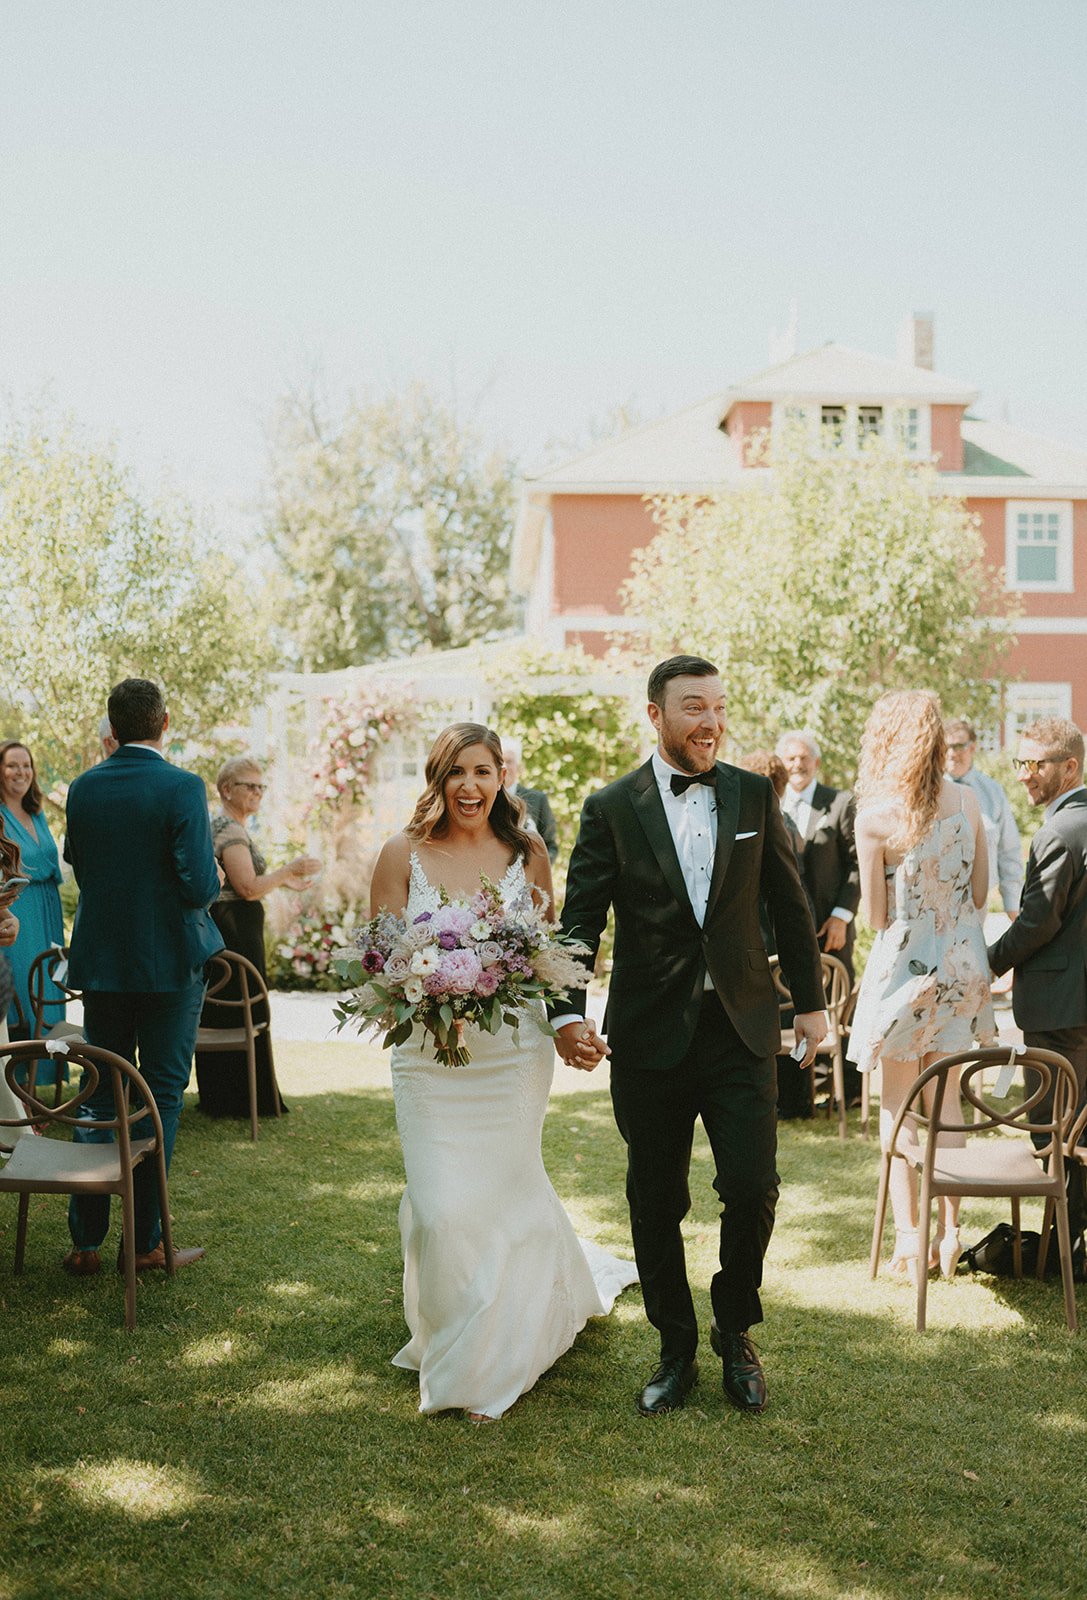 Tips for A Safer and Socially Distanced Wedding This Summer - Bronte Bride Blog